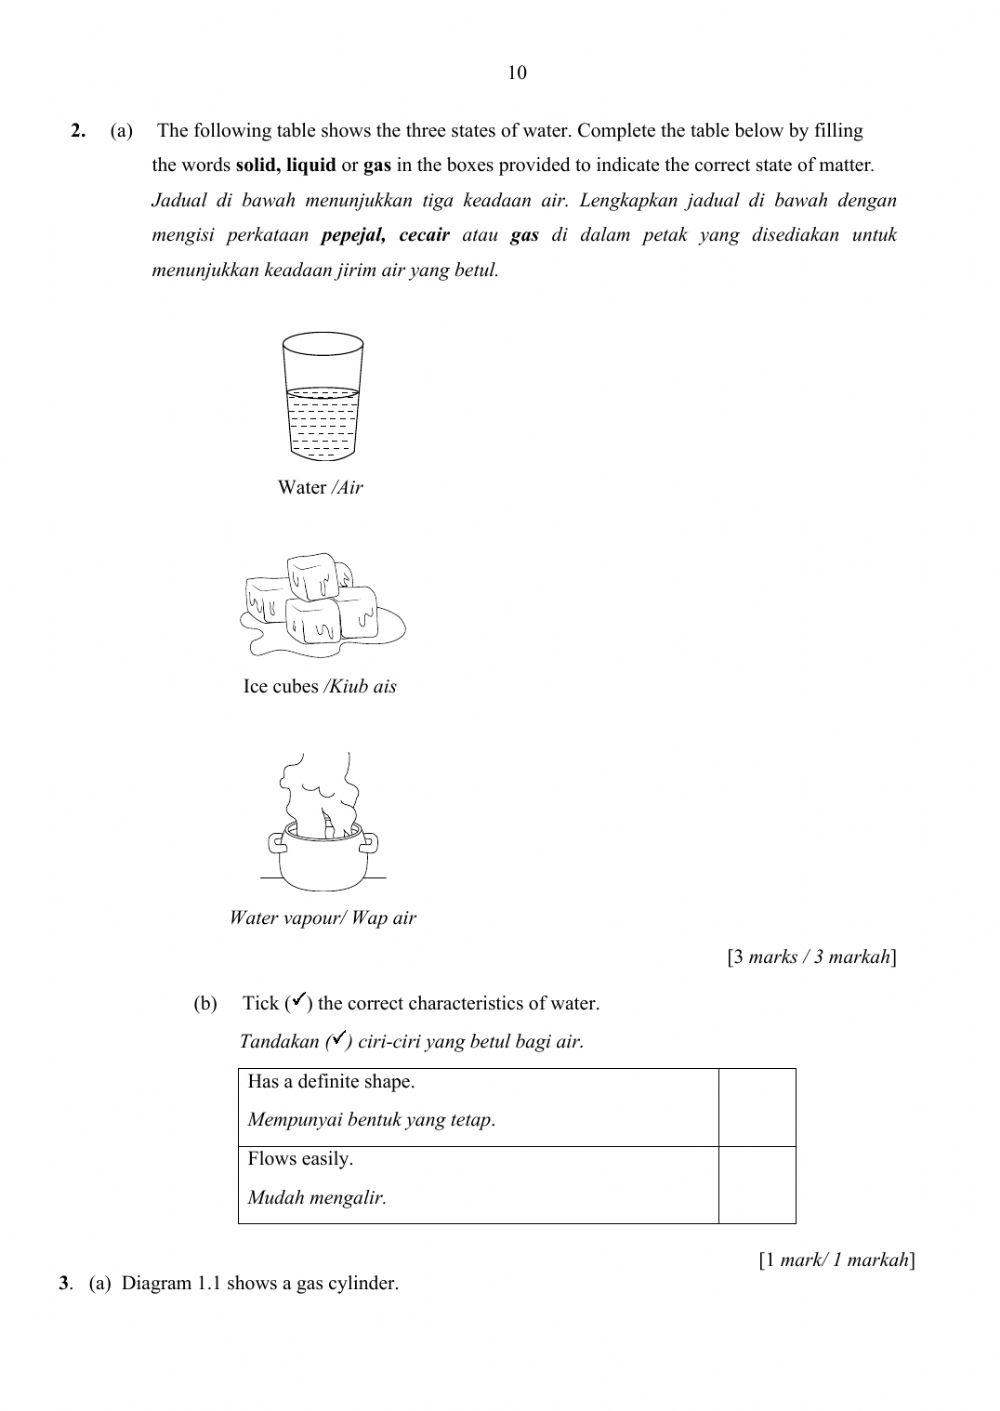 Science form 2